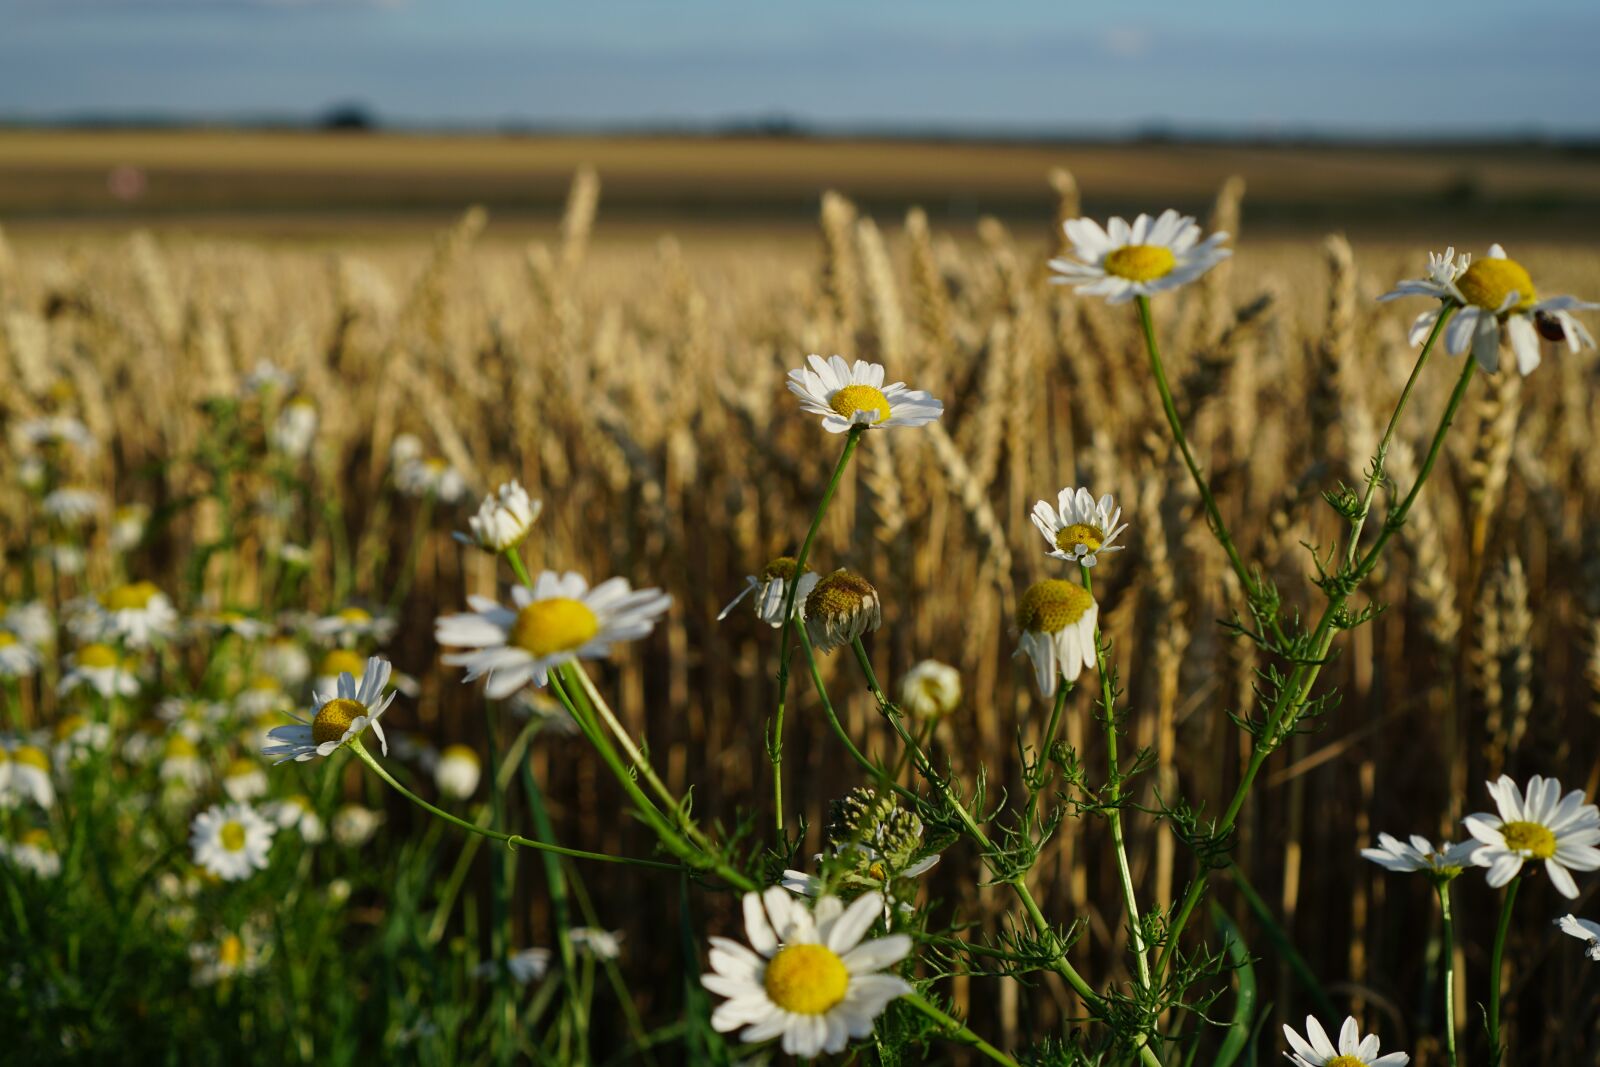 Sony a6300 sample photo. Camomile, wheat field, summer photography